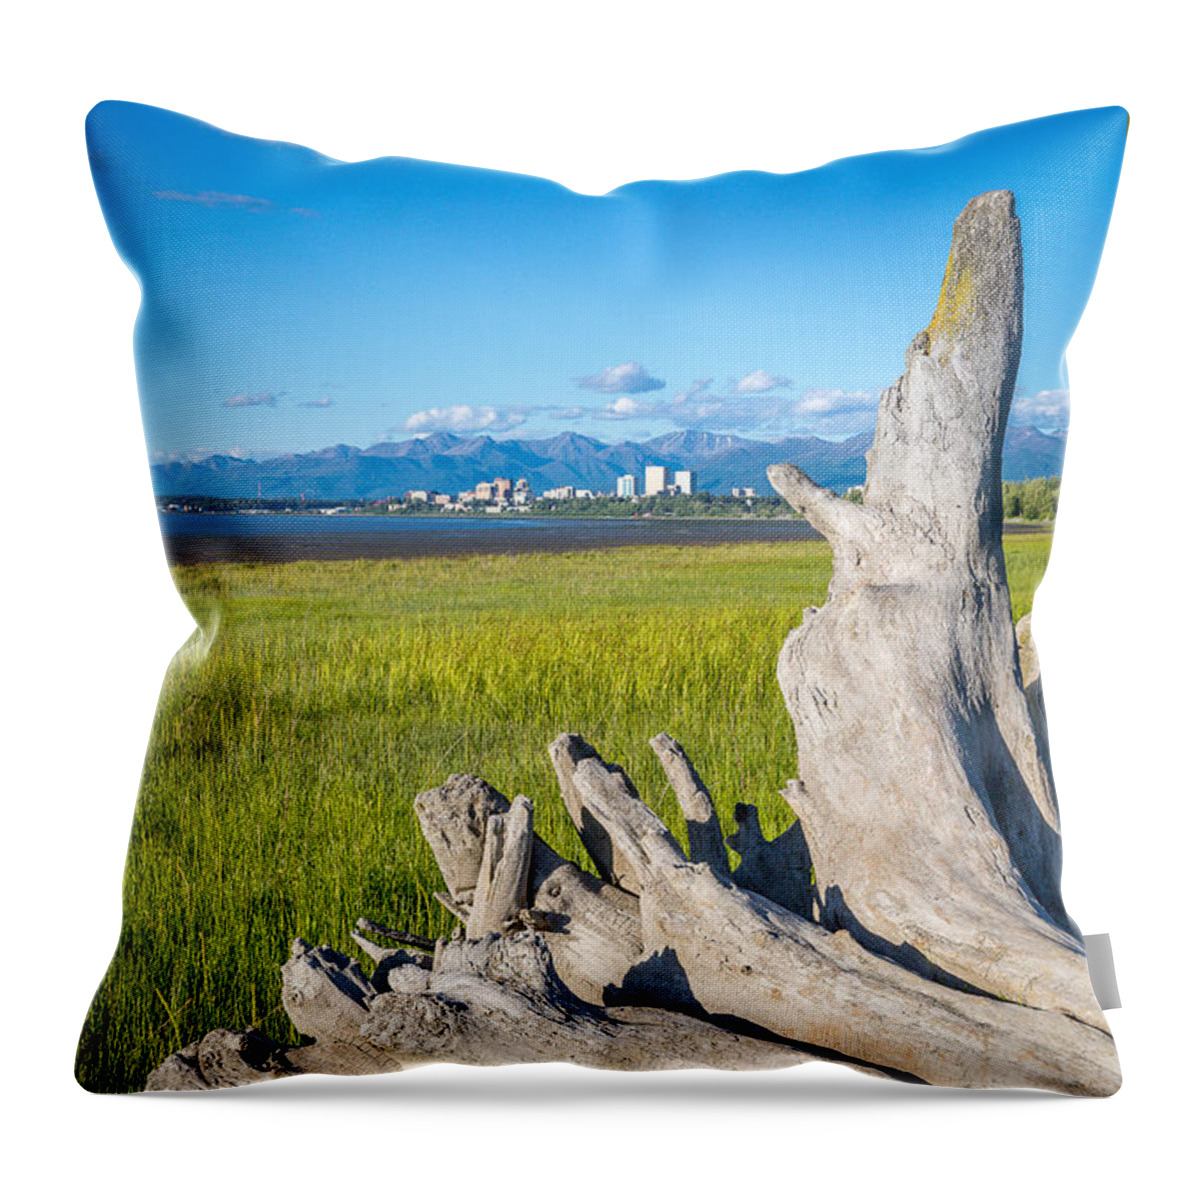 Anchorage Throw Pillow featuring the photograph Anchorage Summer by Tim Newton